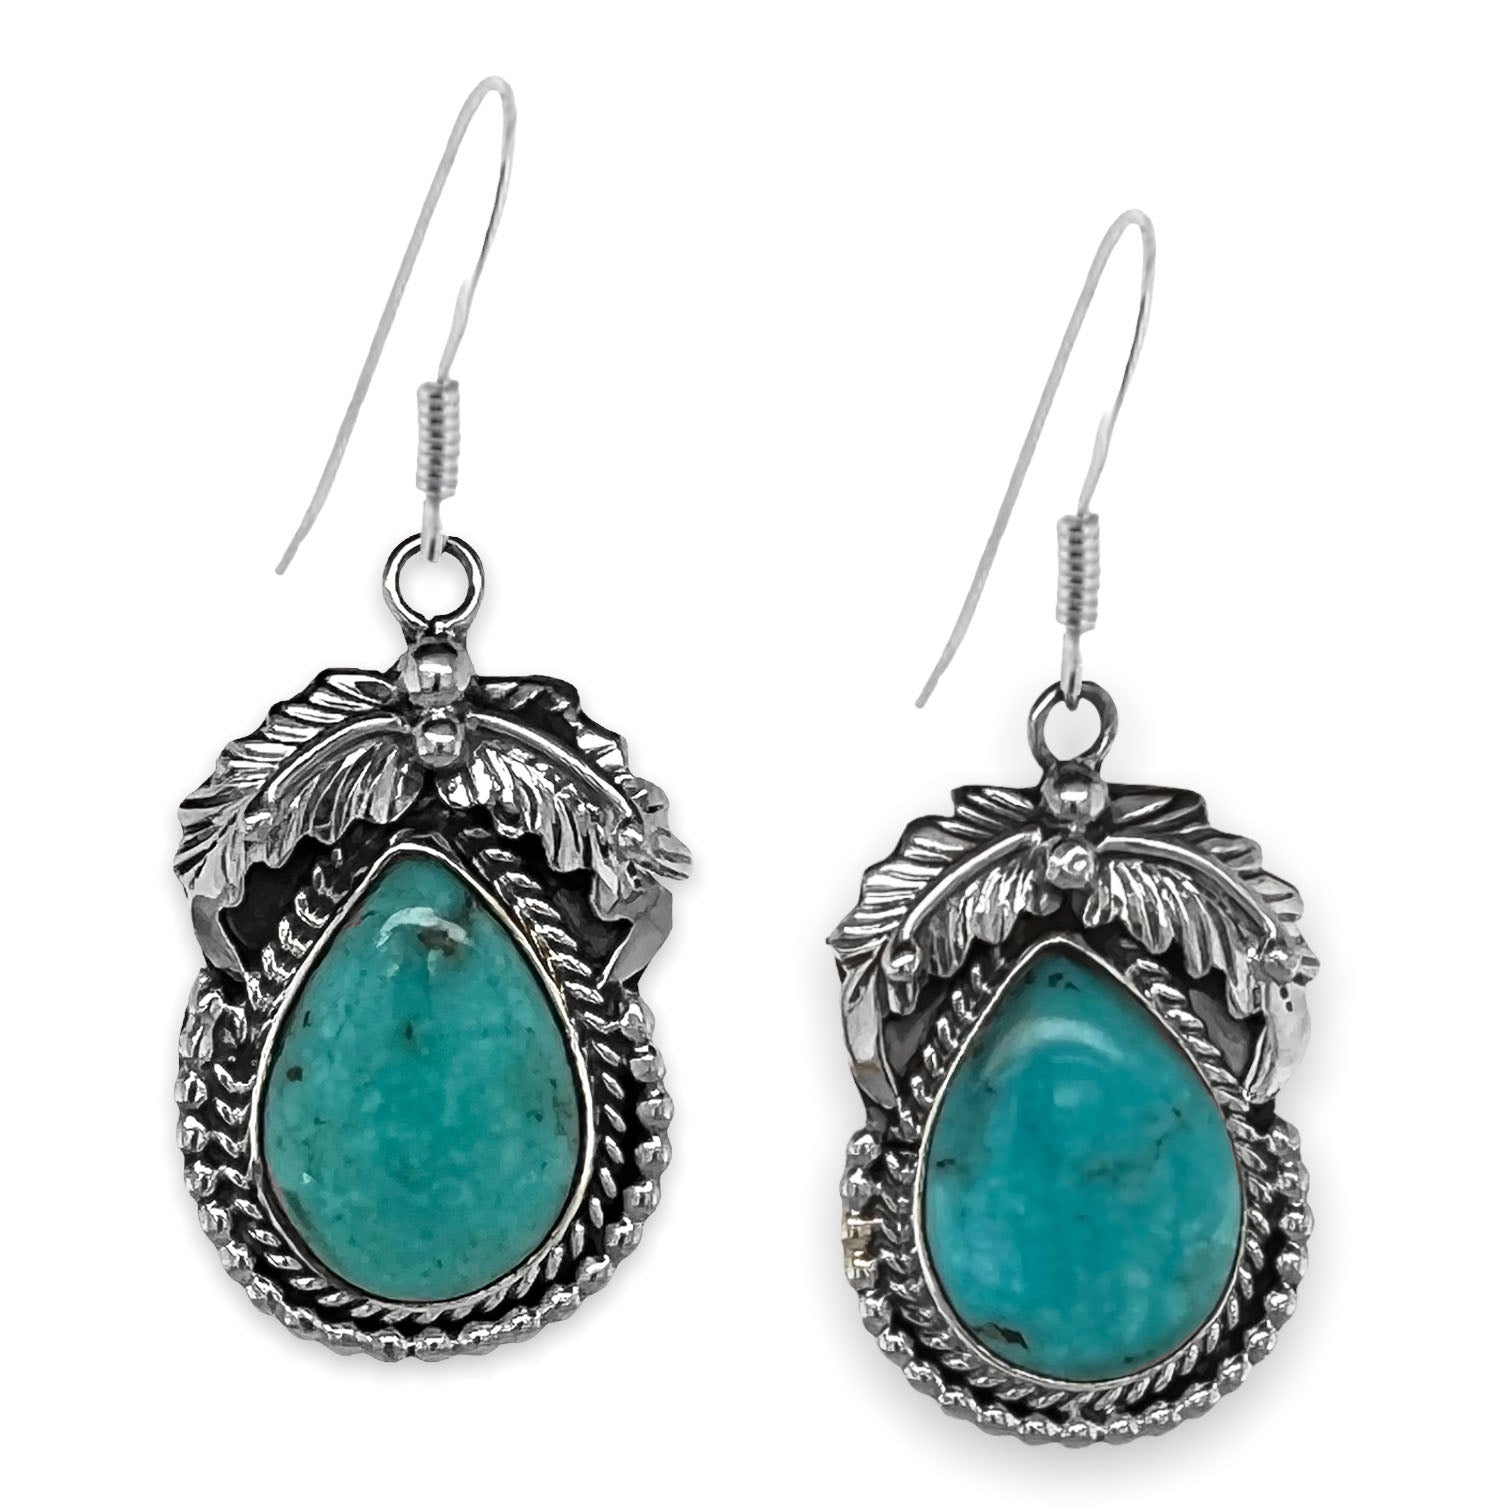 Genuine Sleeping Beauty Turquoise Earrings, 925 Sterling Silver, Native American USA Handmade, Artist Signed, French Hook Style, Nickel Free